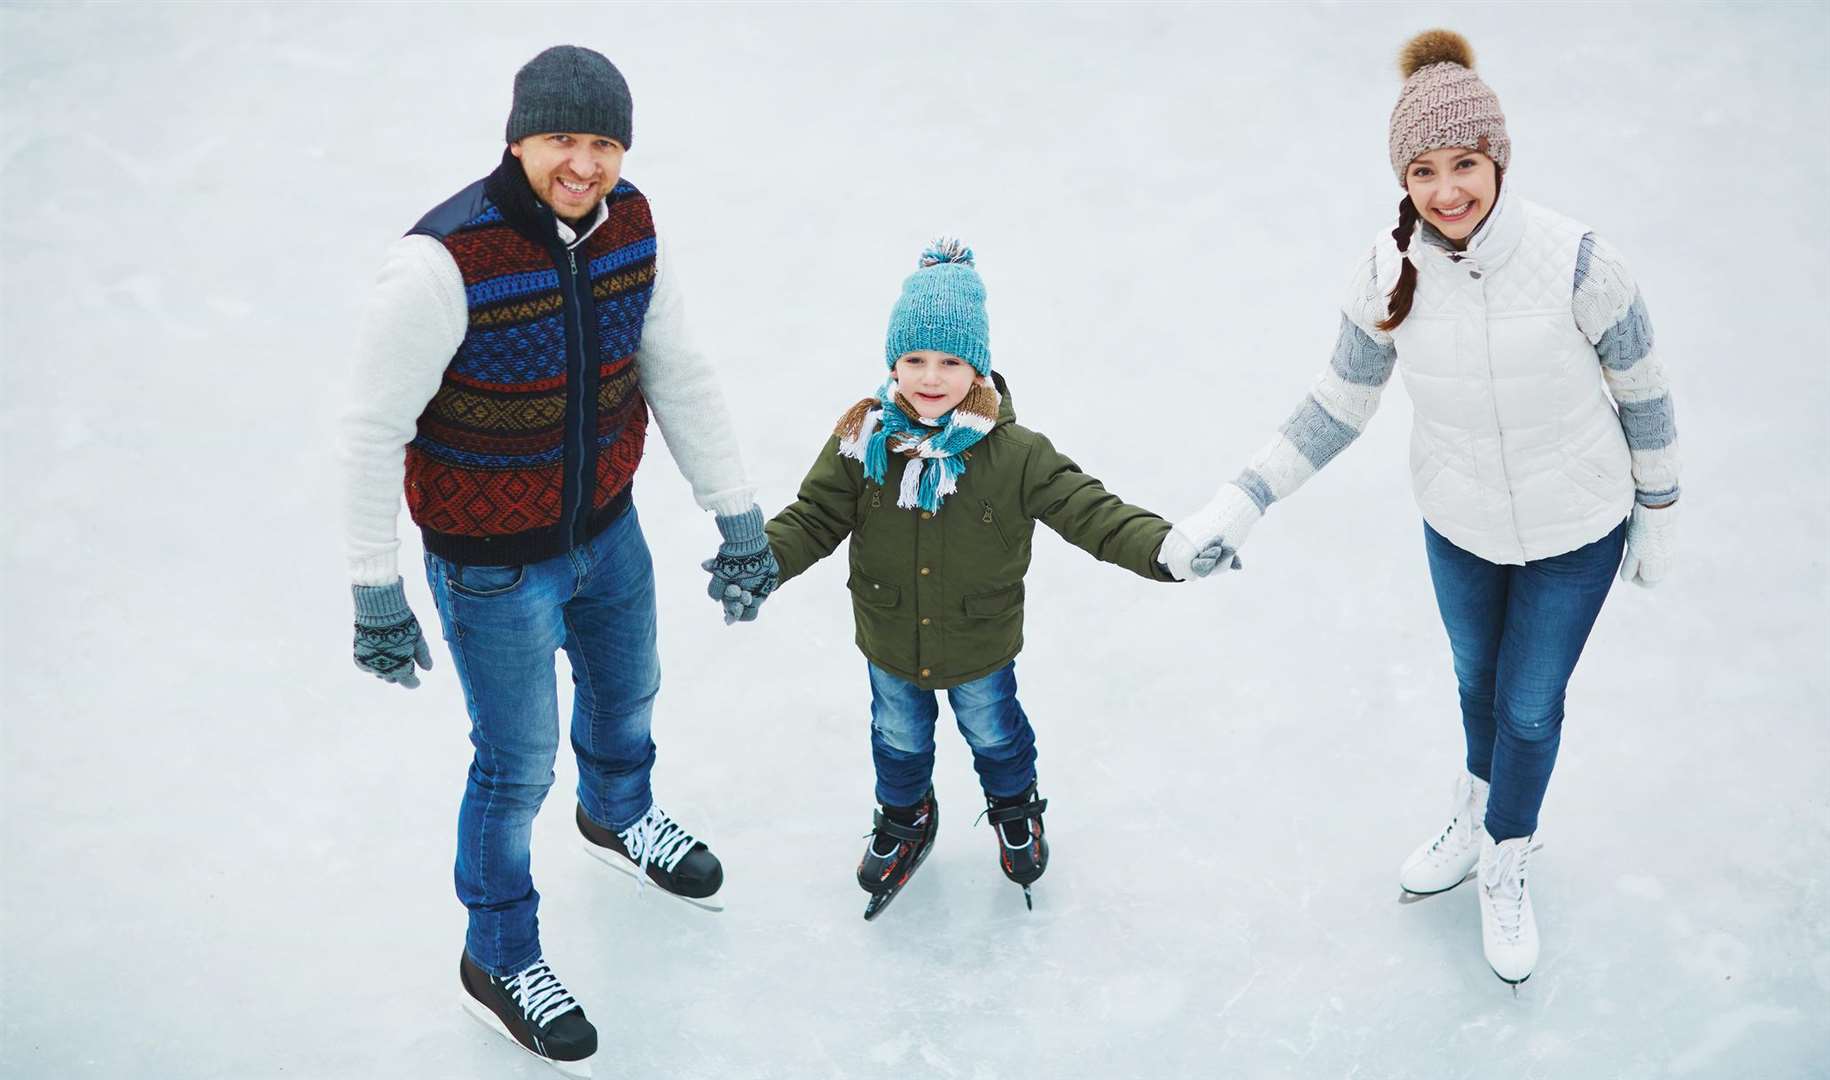 Feel festive and head out on the ice this winter